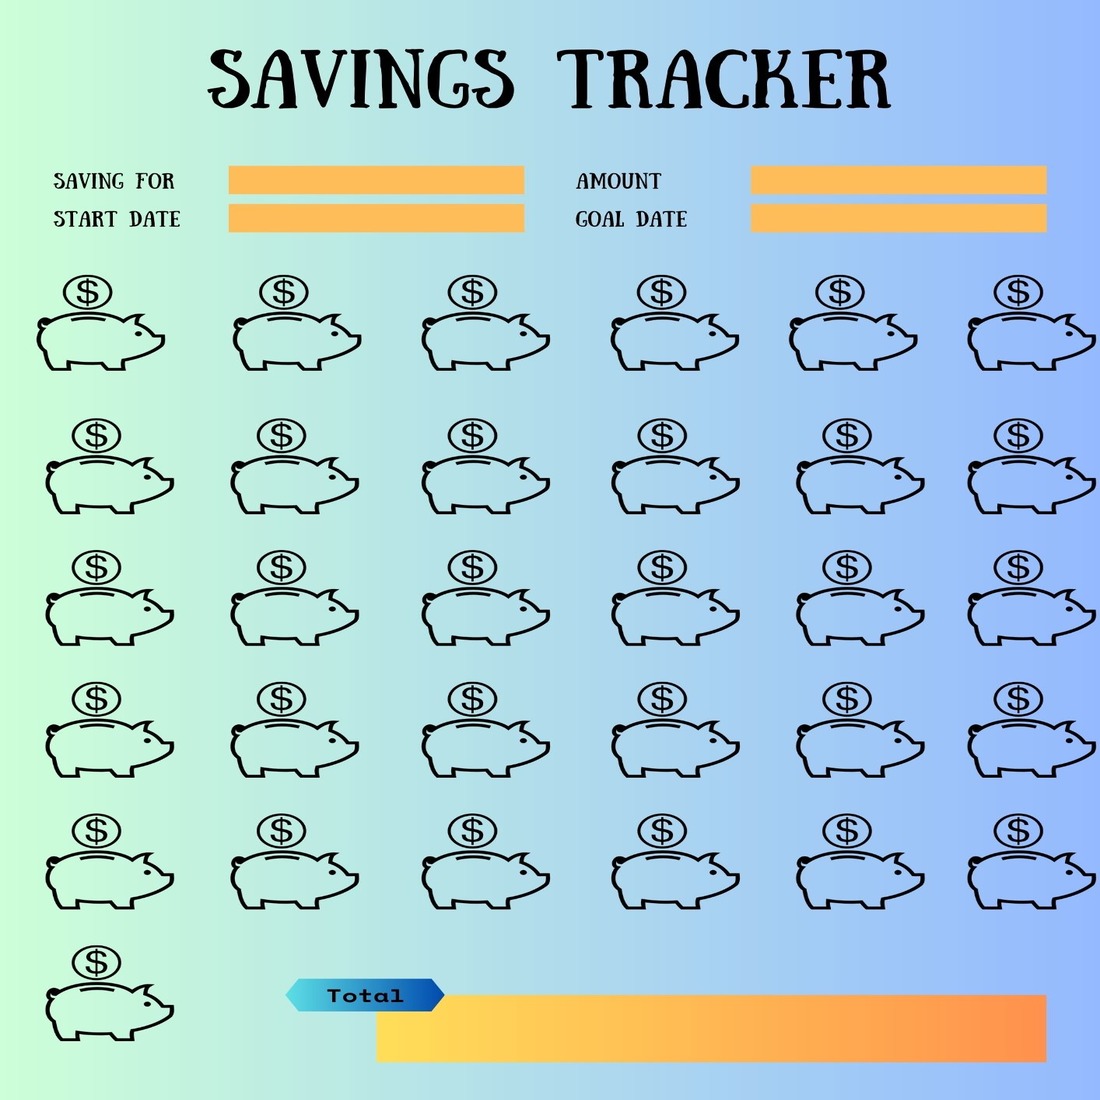 Savings Tracker preview image.